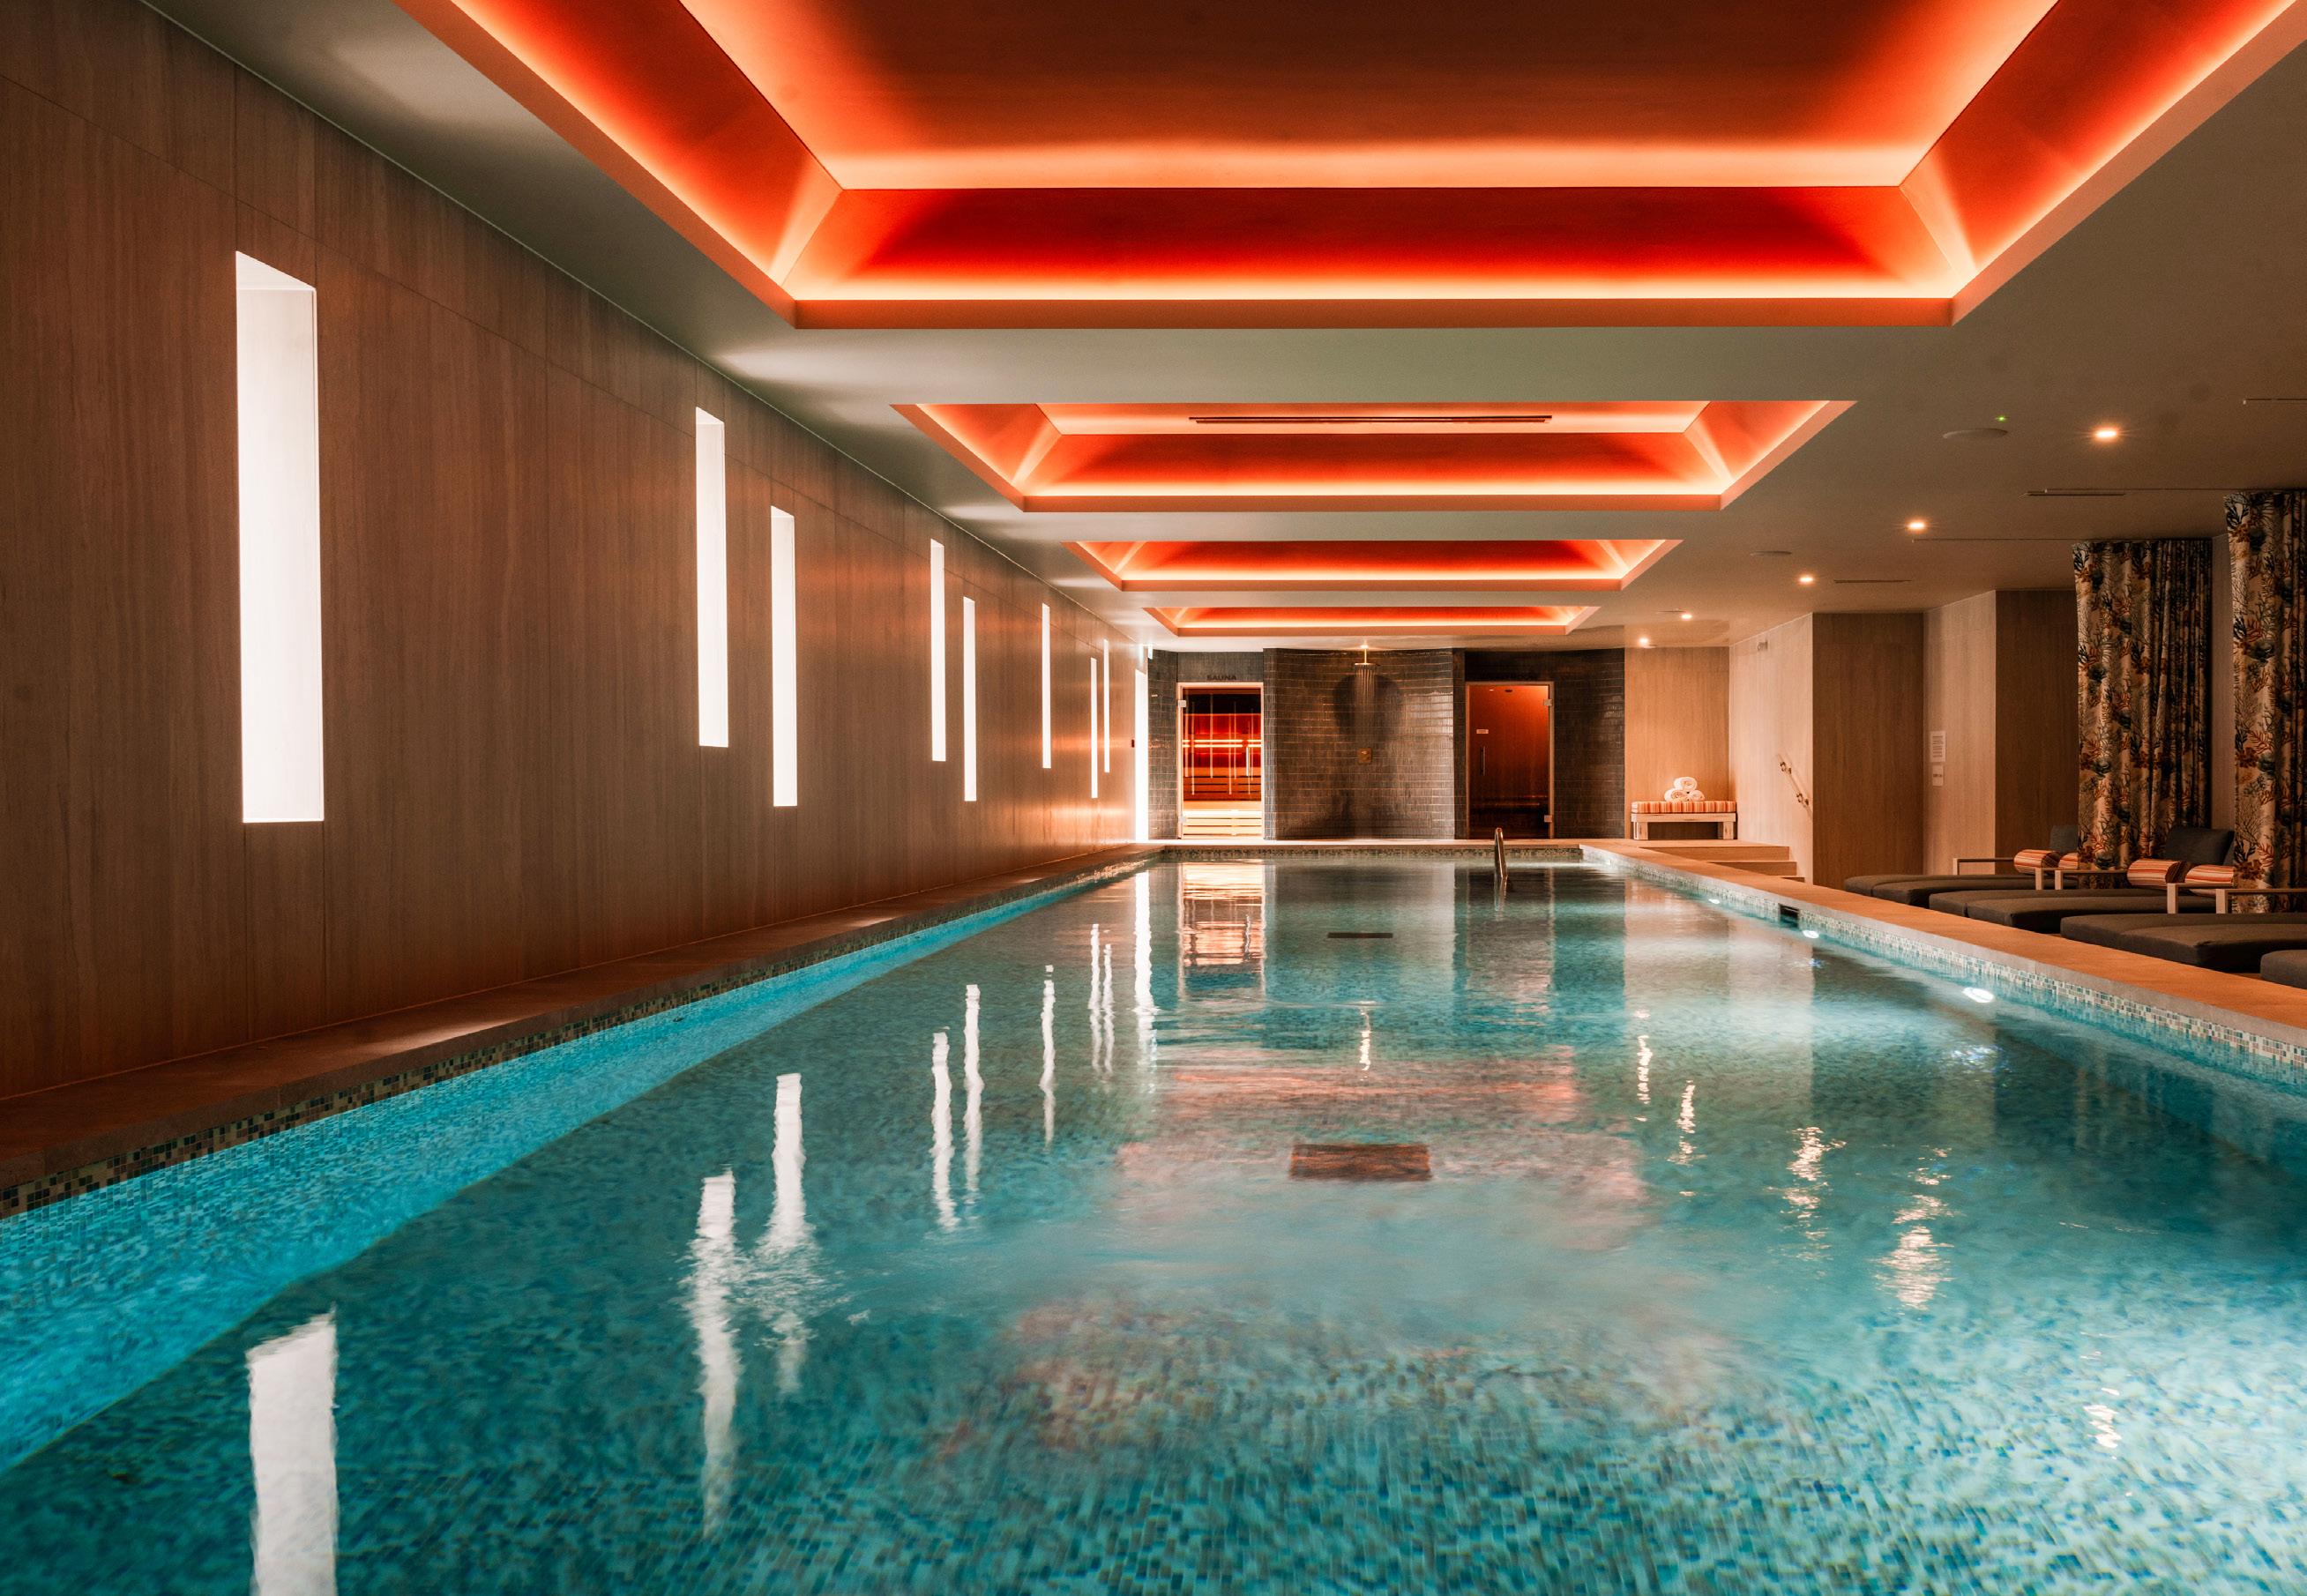 The 18m indoor pool at The Nici in Bournemouth, UK
